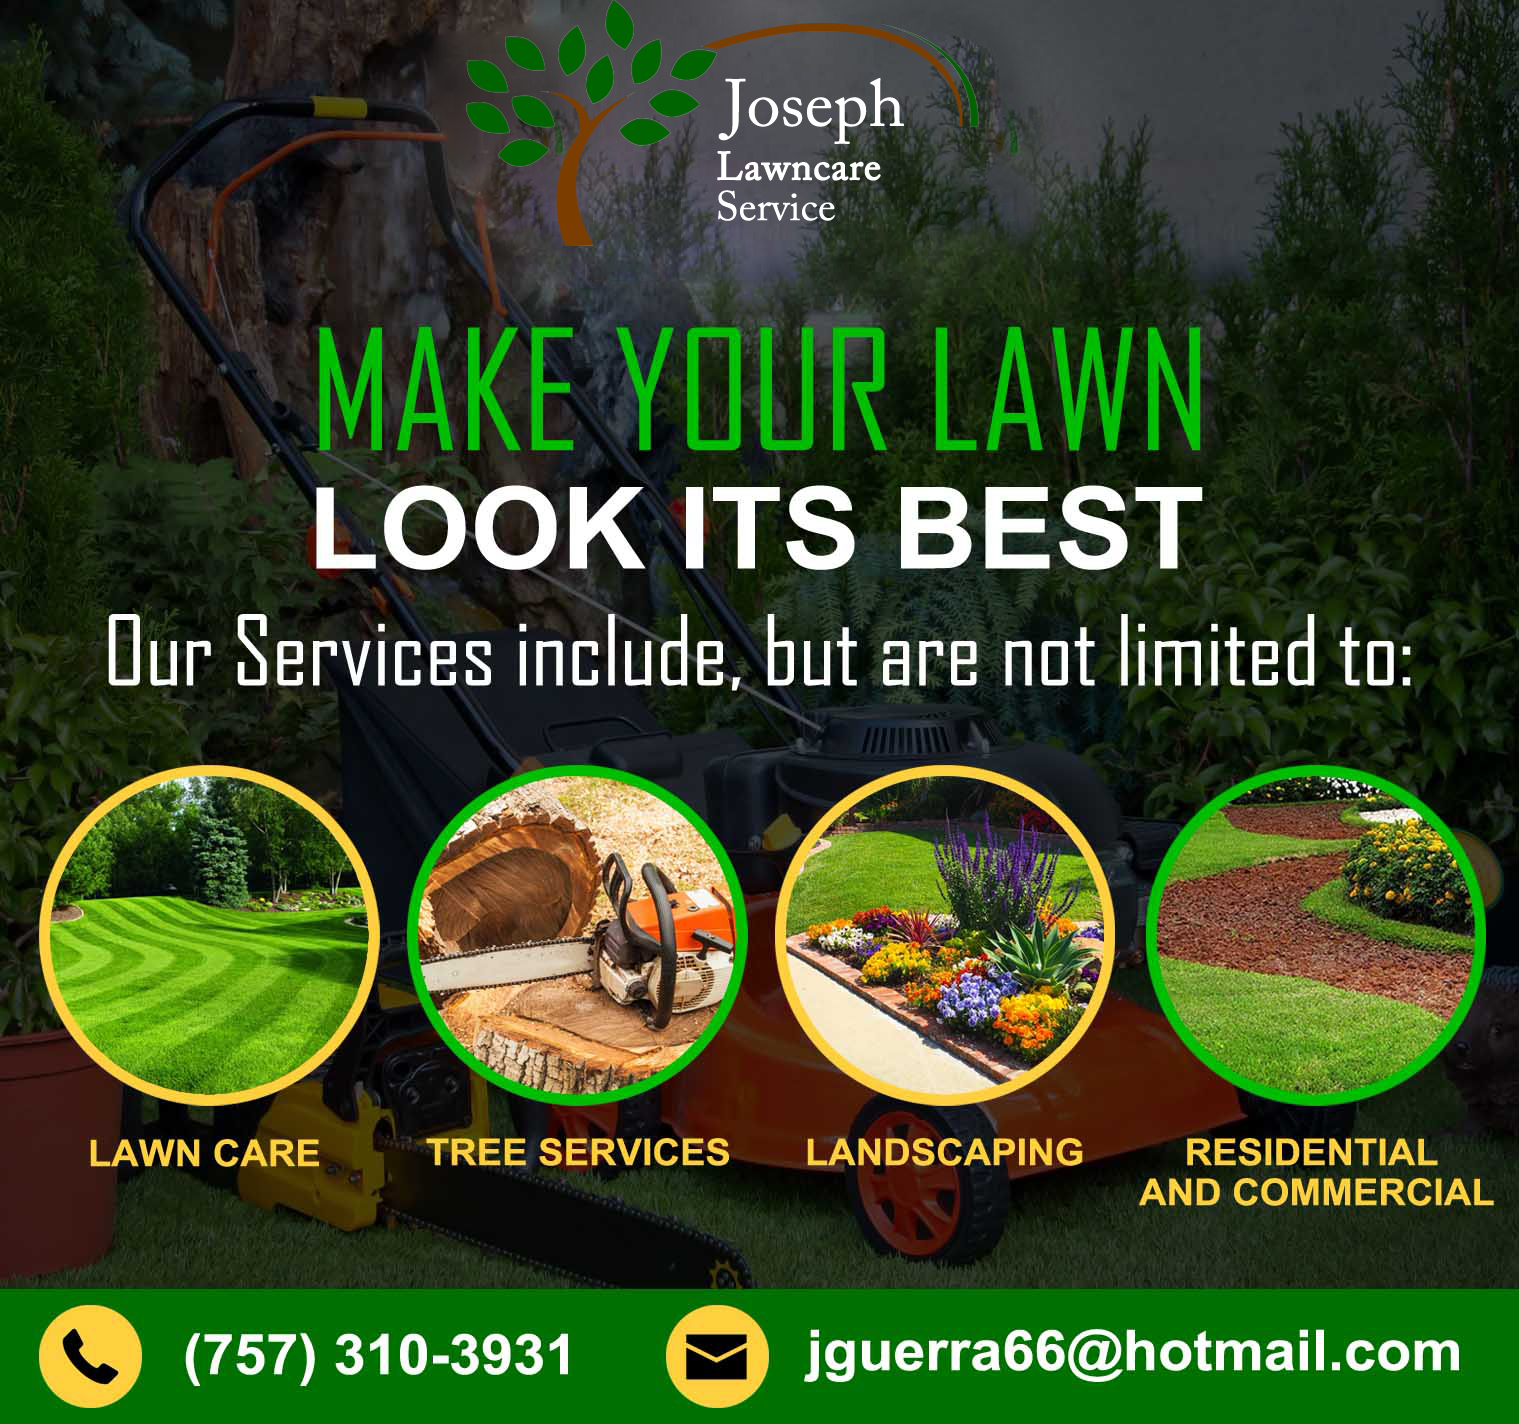 Best Lawn Care Services in Williamsburg